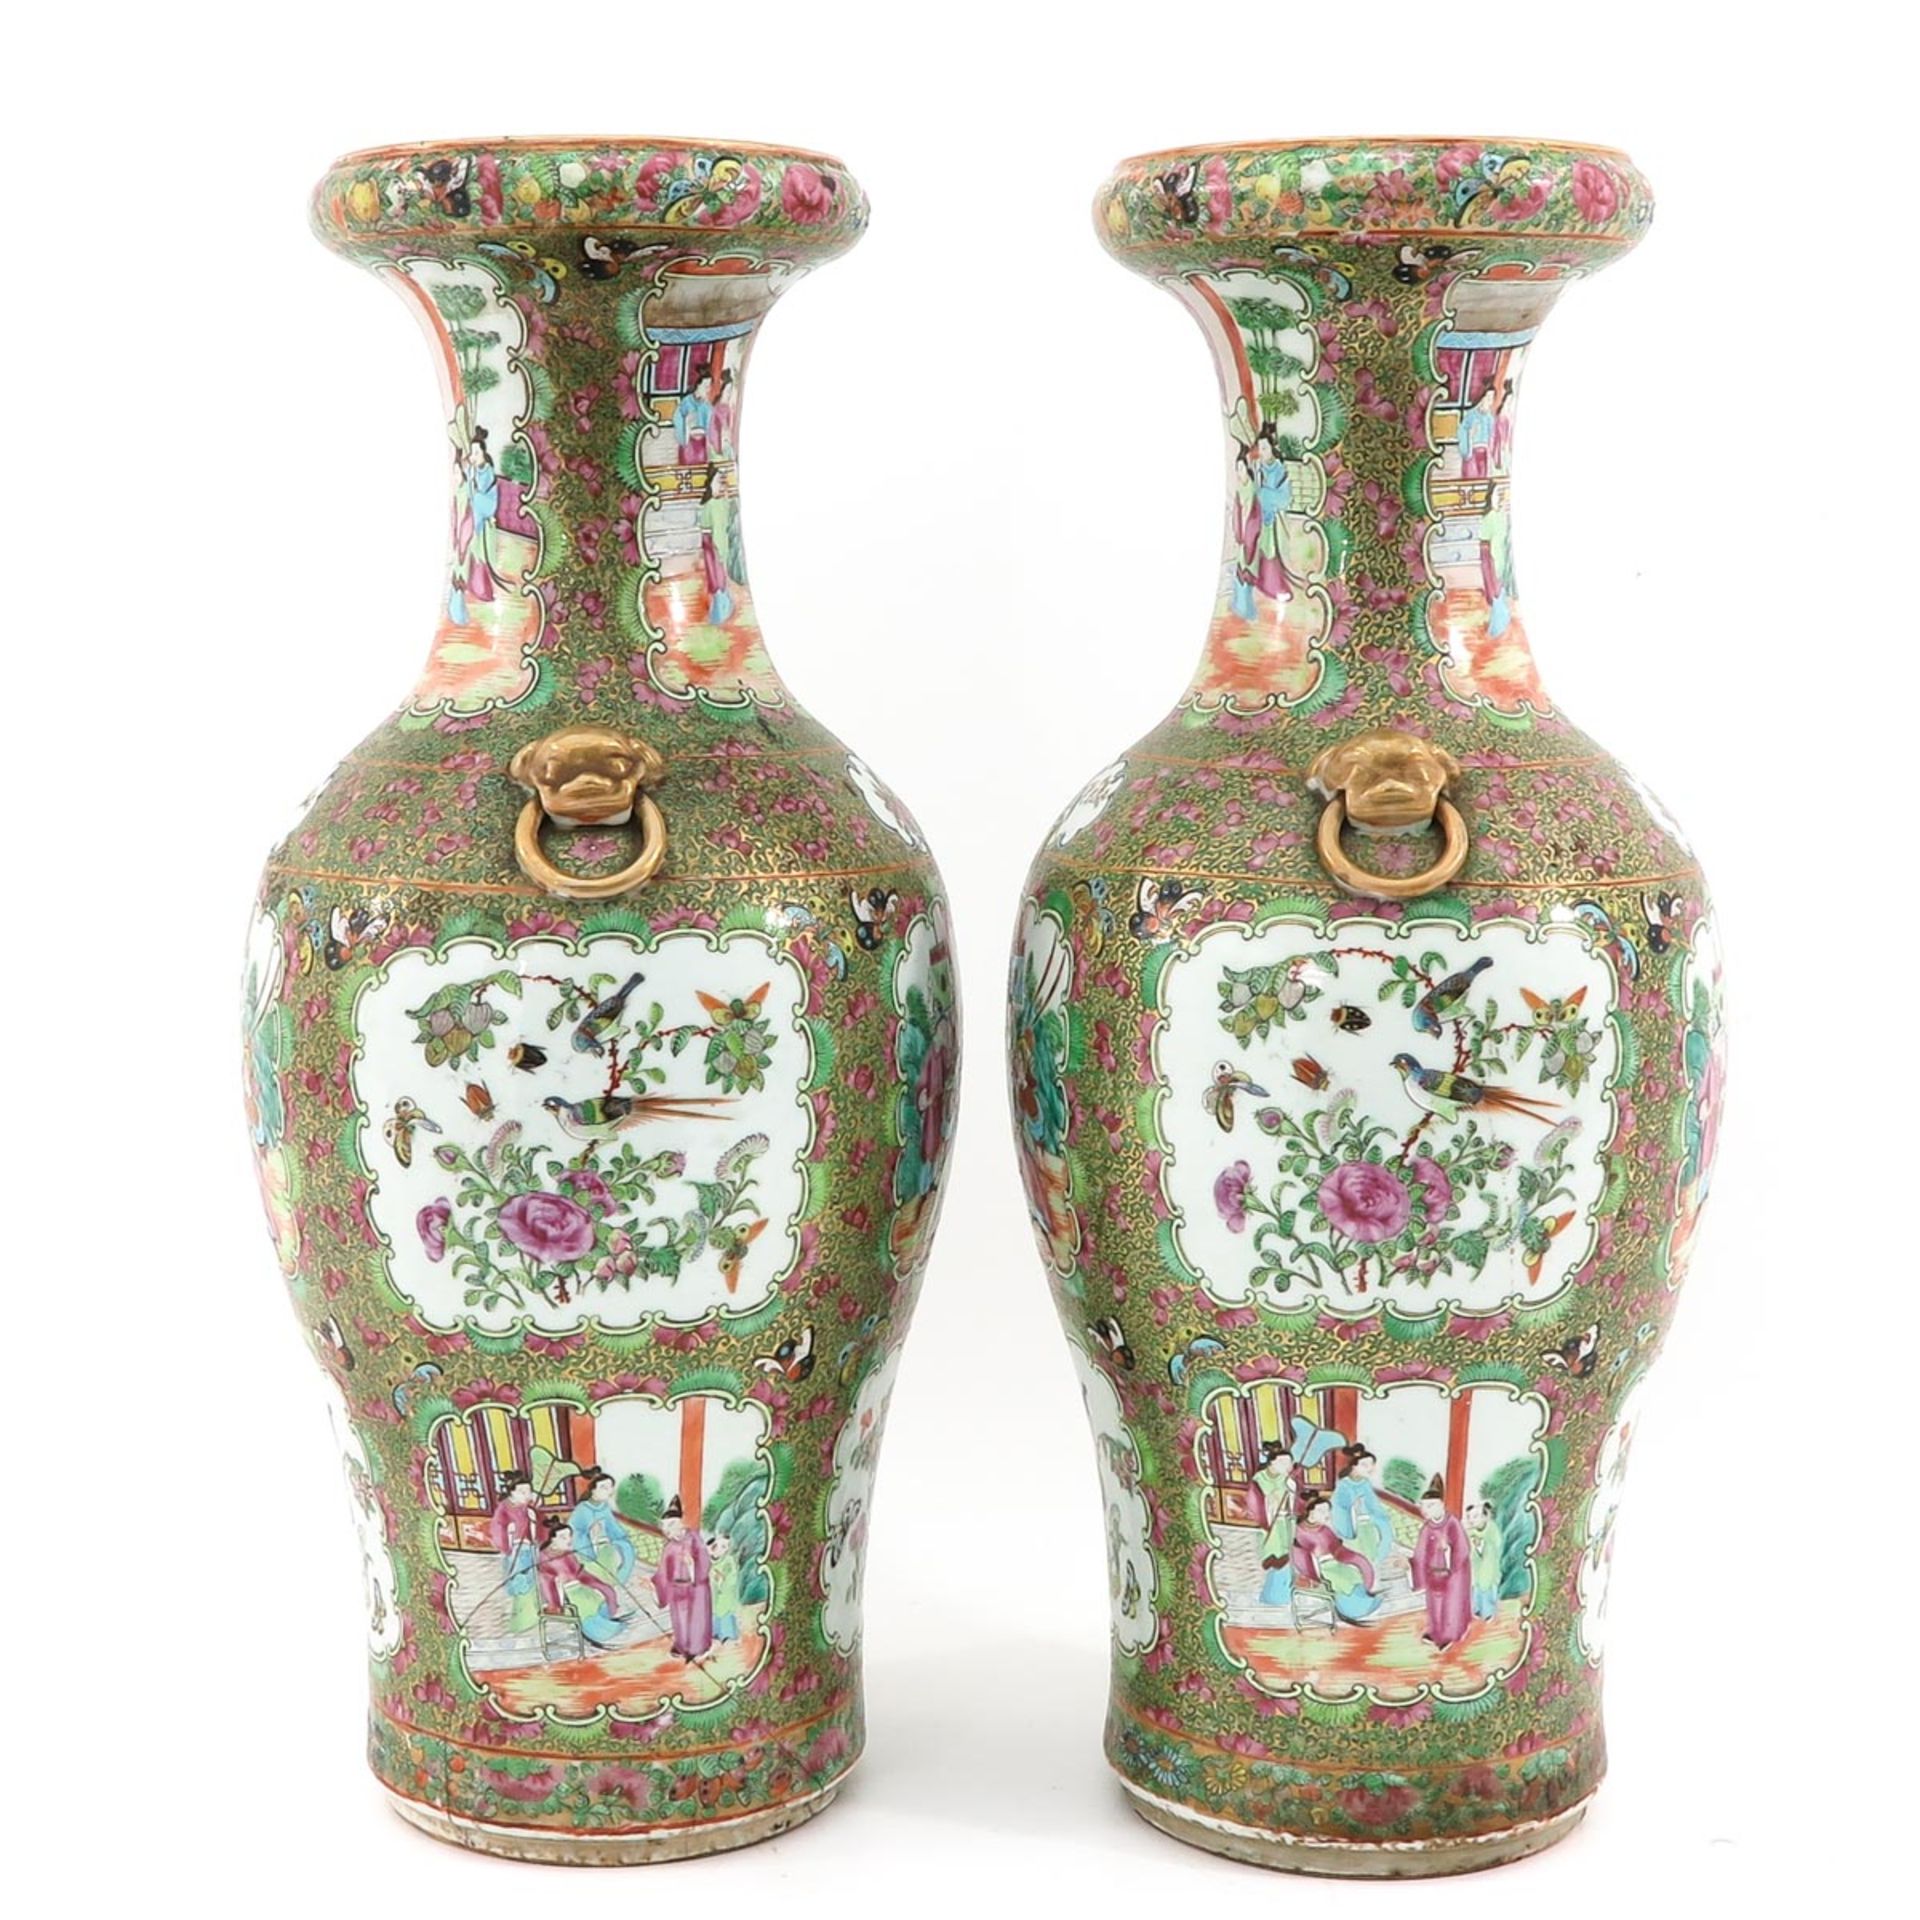 A Pair of Cantonese Vases - Image 4 of 9